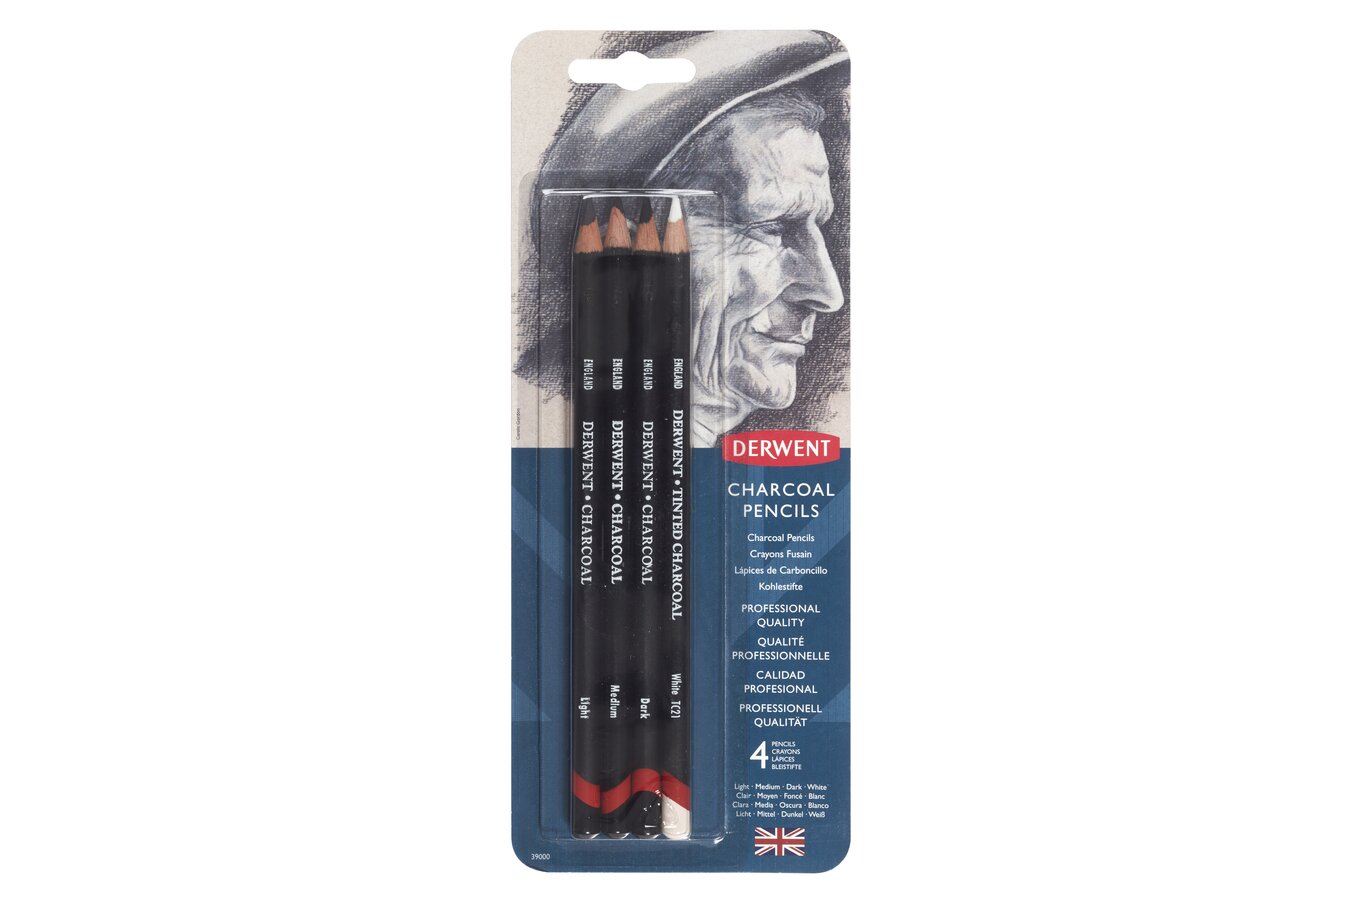 White Charcoal Pencil, White Art Drawing Pencil, Professional Easy